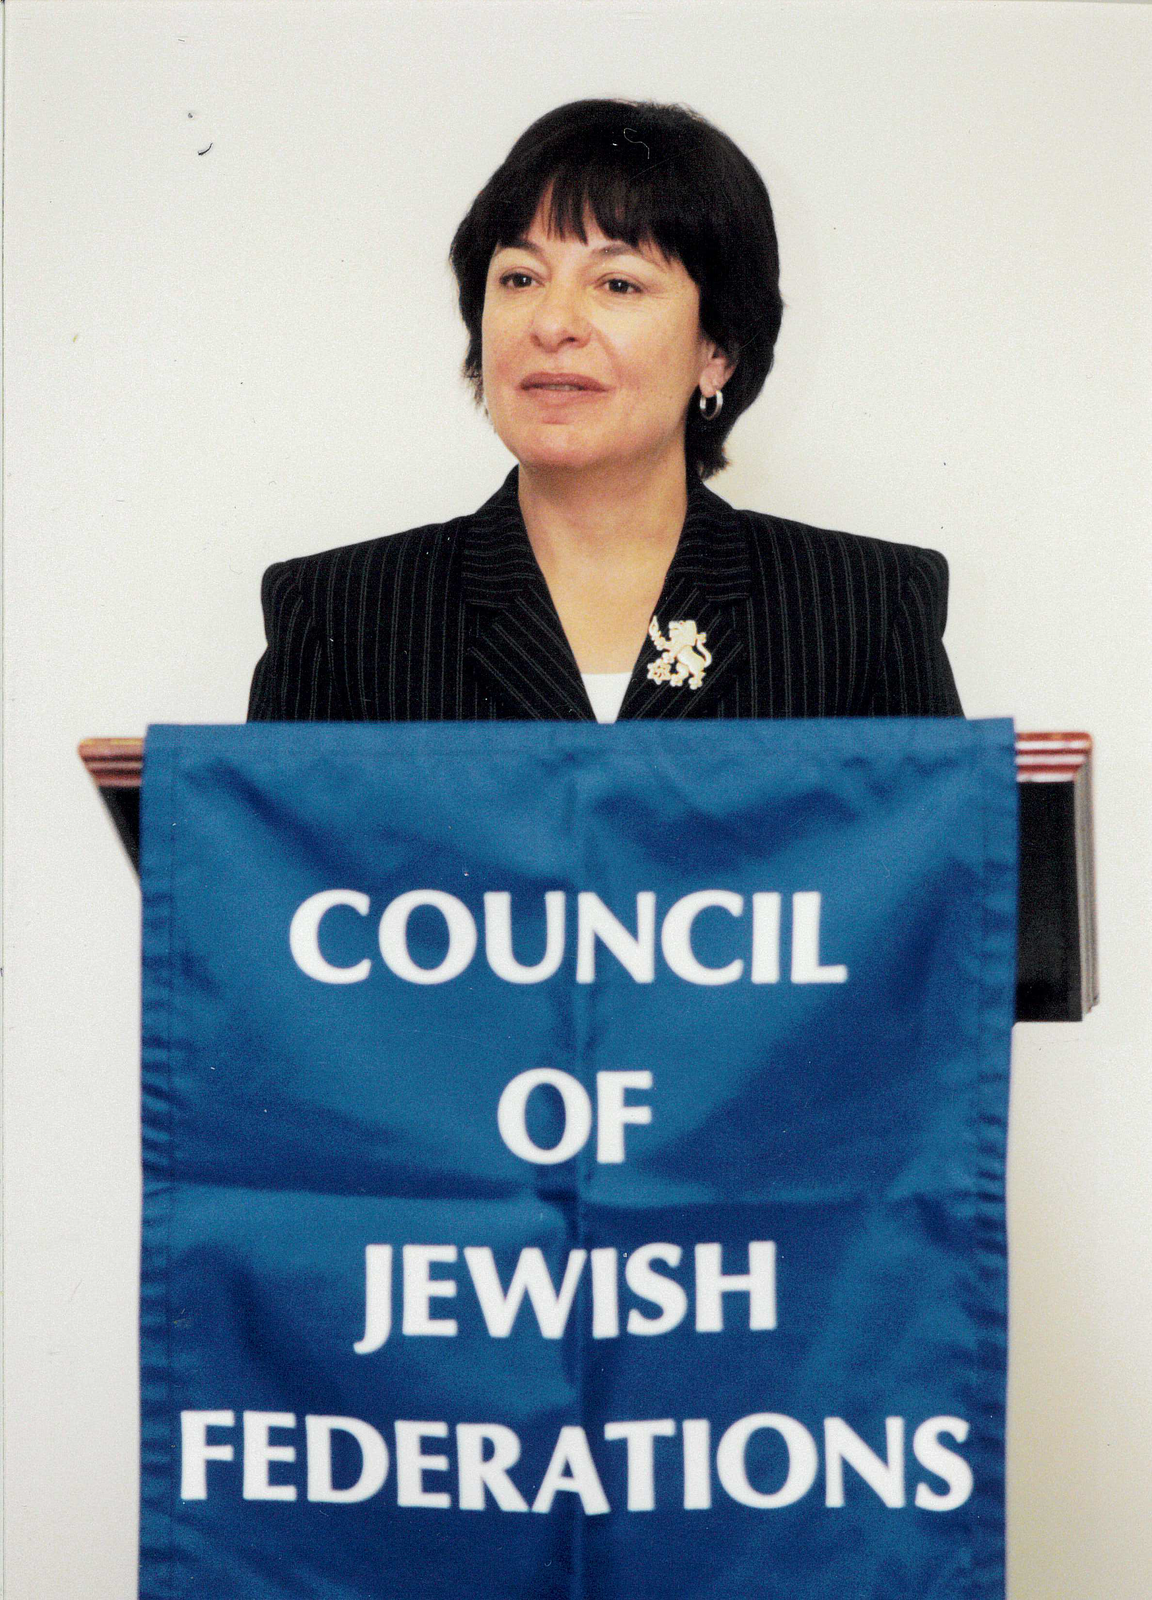 Michele representing the Council of Jewish Federations.